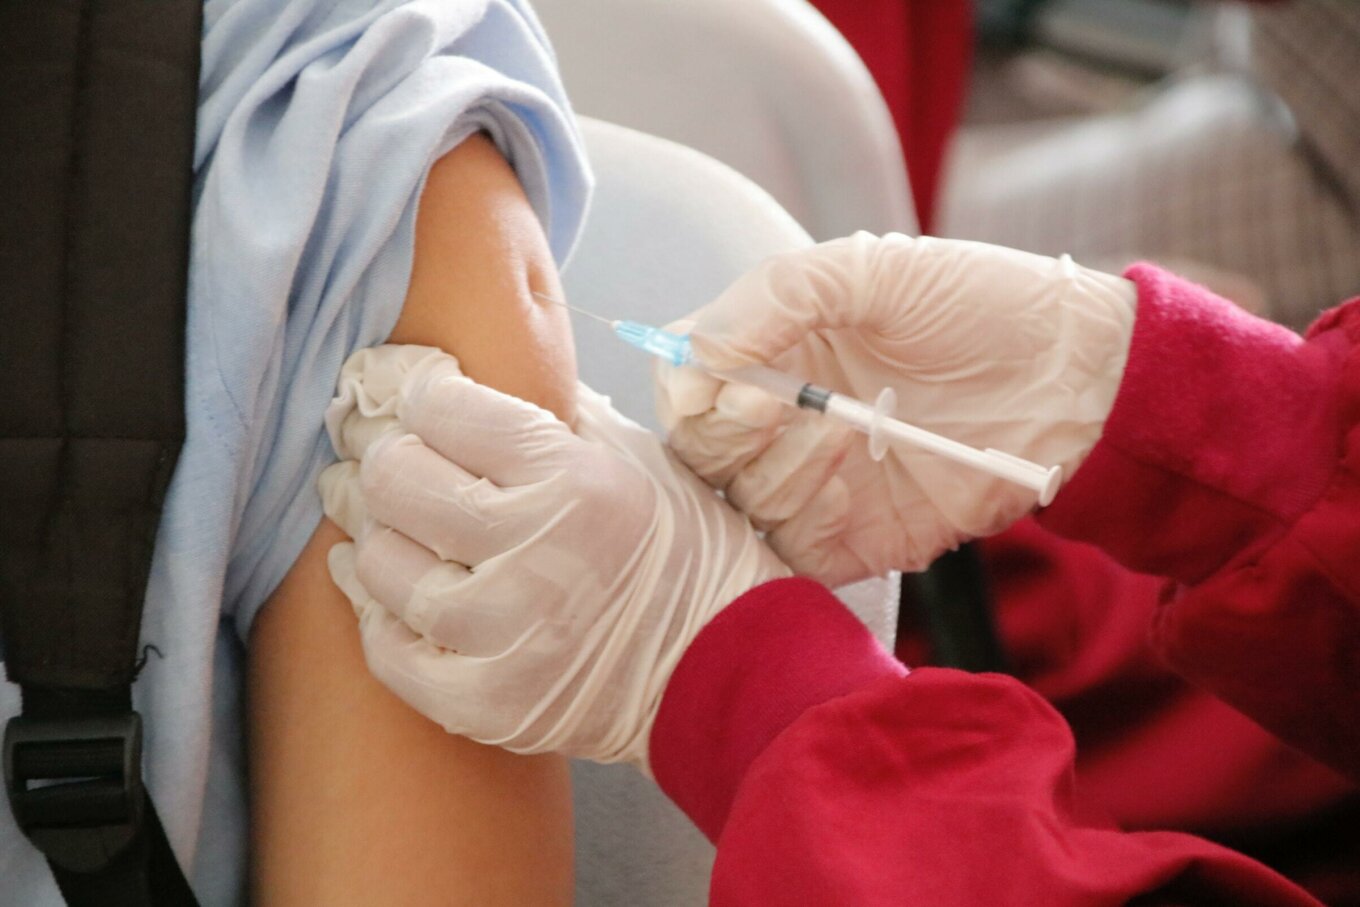 A person receives a vaccine